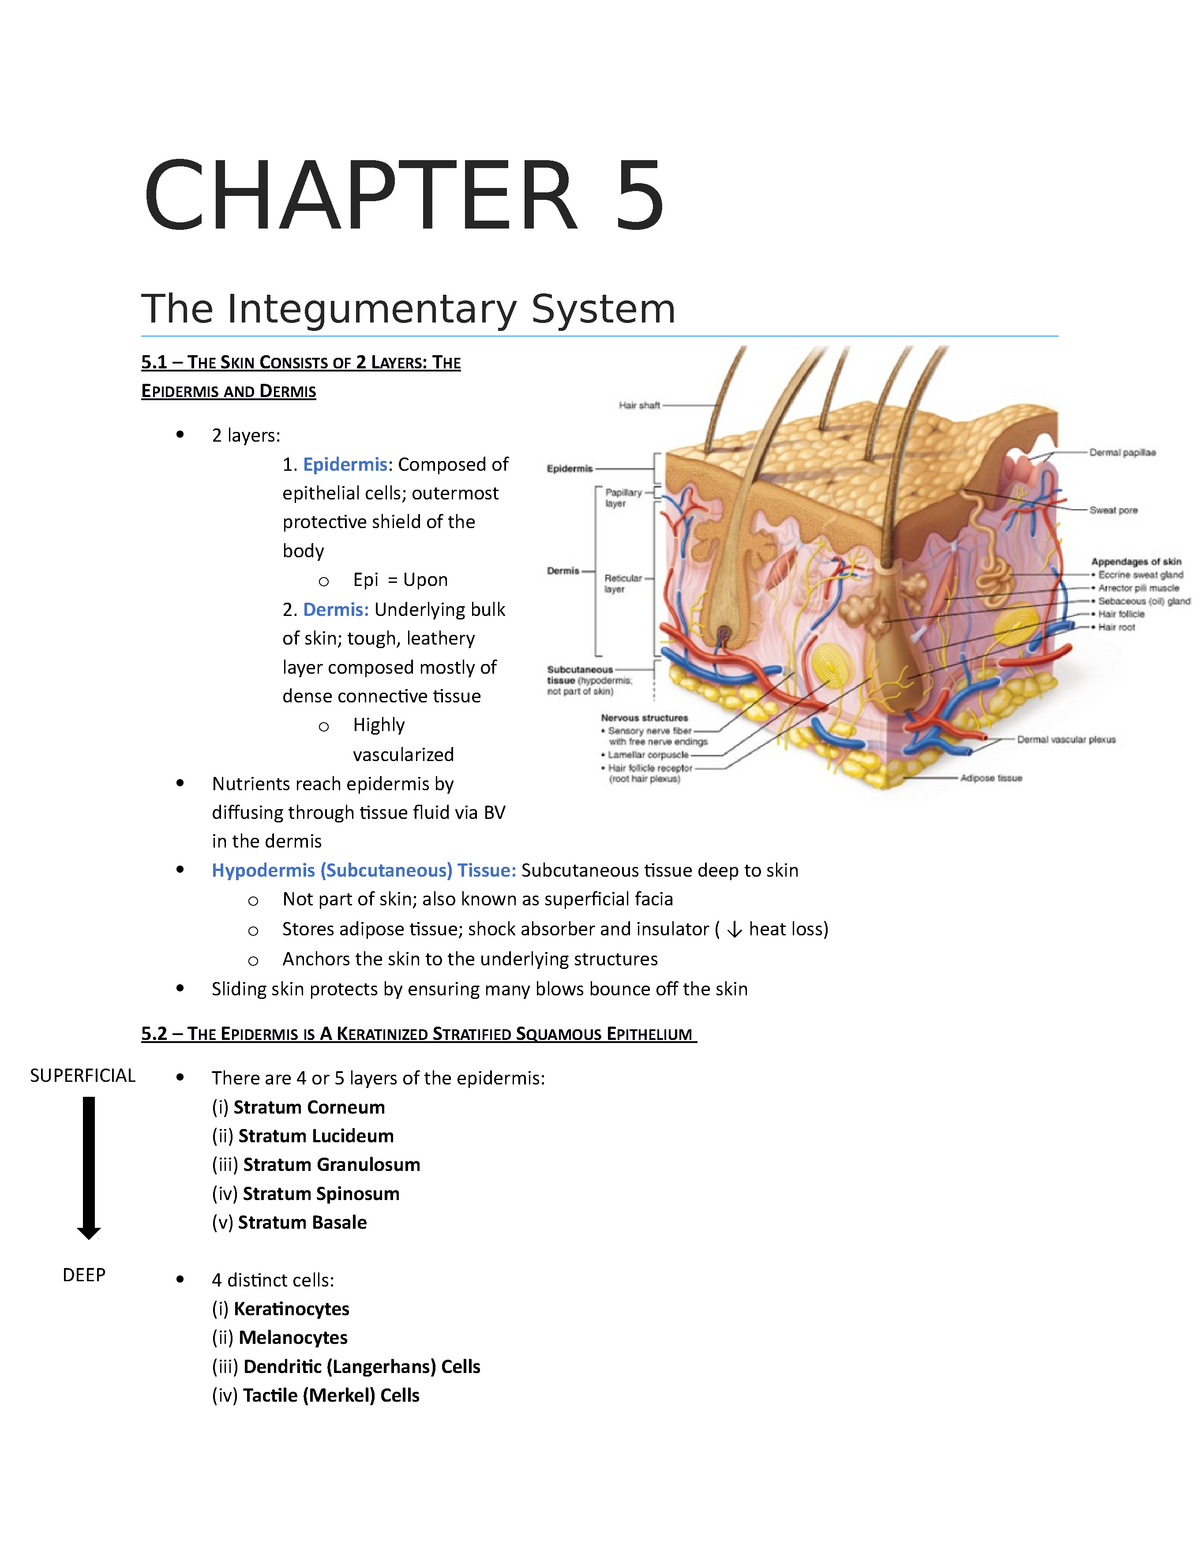 chapter-5-integumentary-system-chapter-5-the-integumentary-system-5-the-skin-consists-of-2